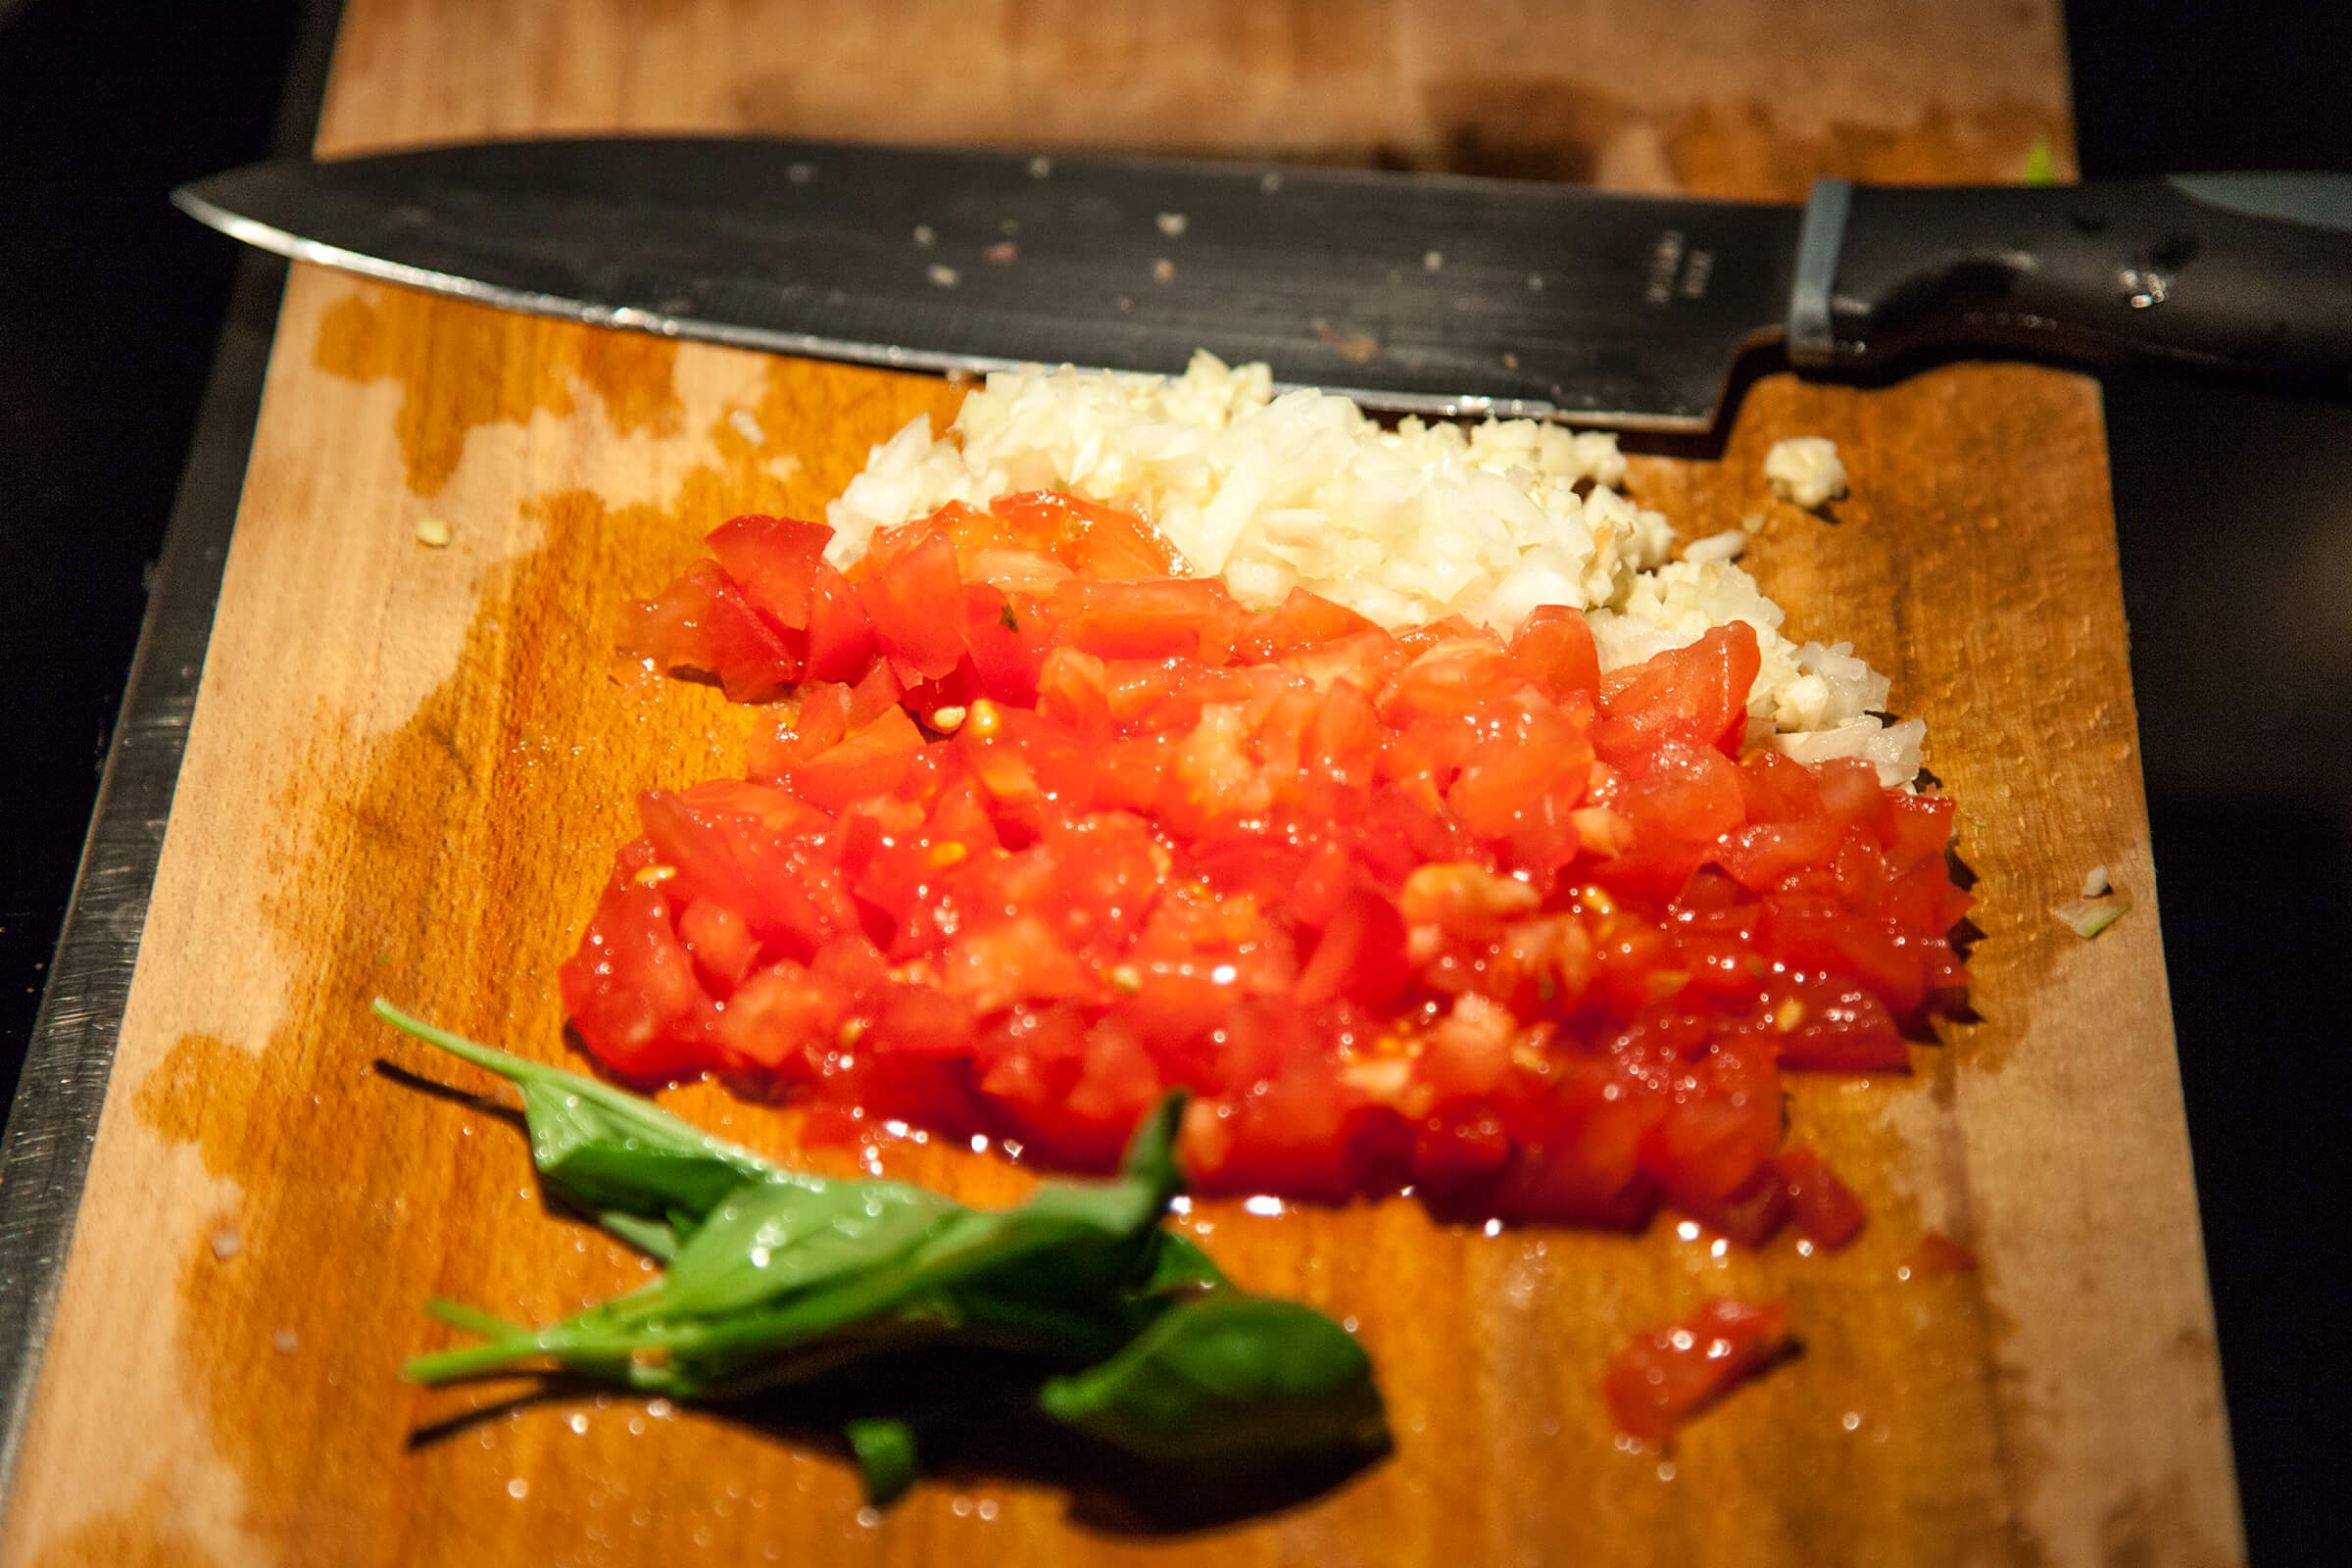 Chop the tomato, basel and onion